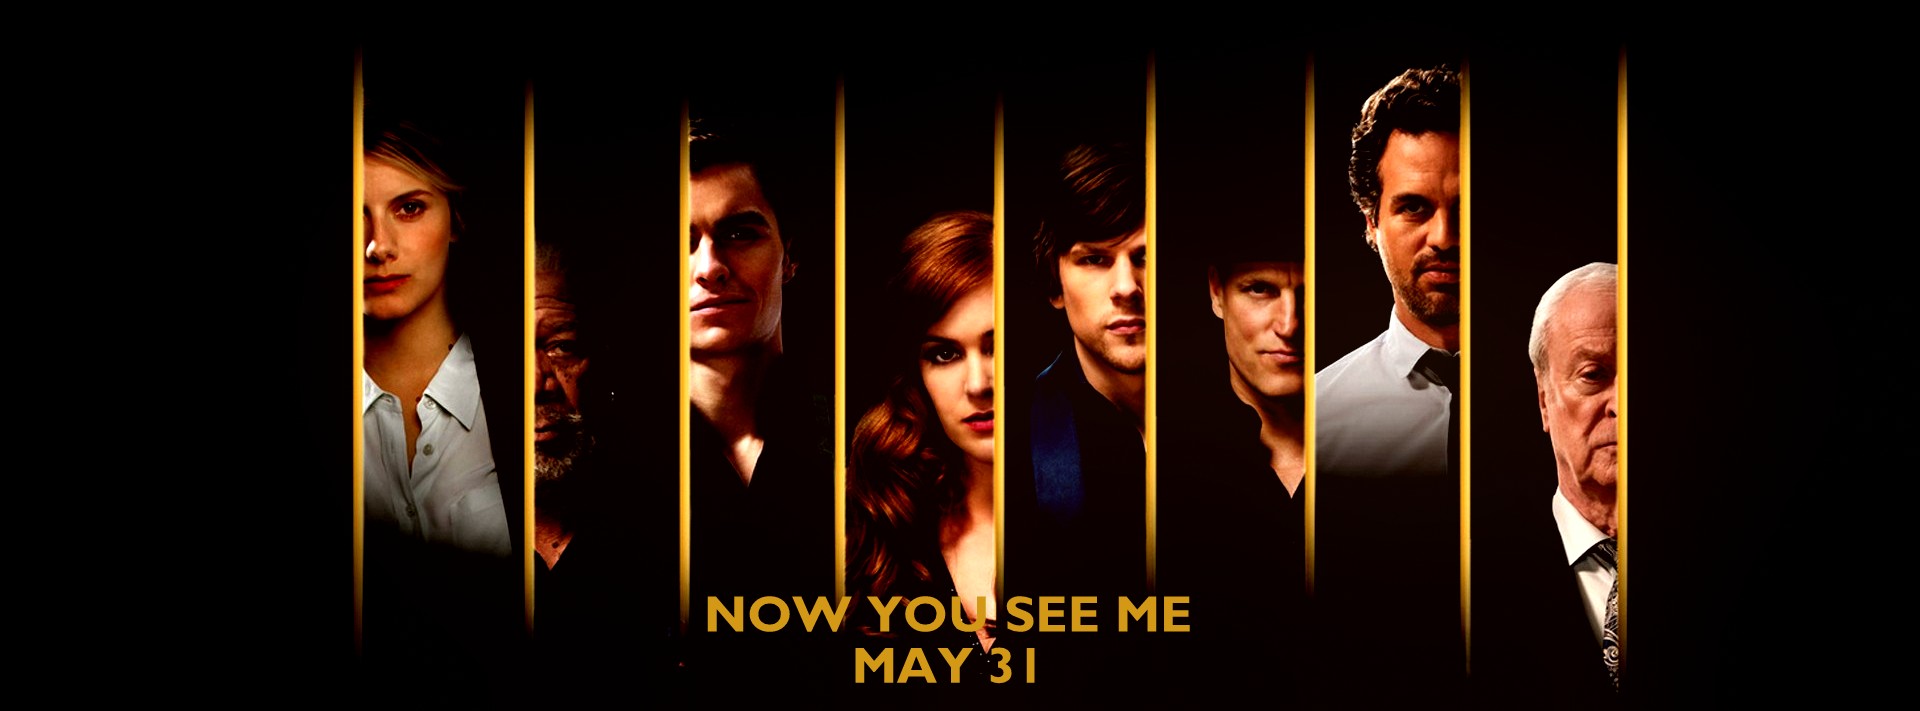 Now You See Me 4K 2013 big poster